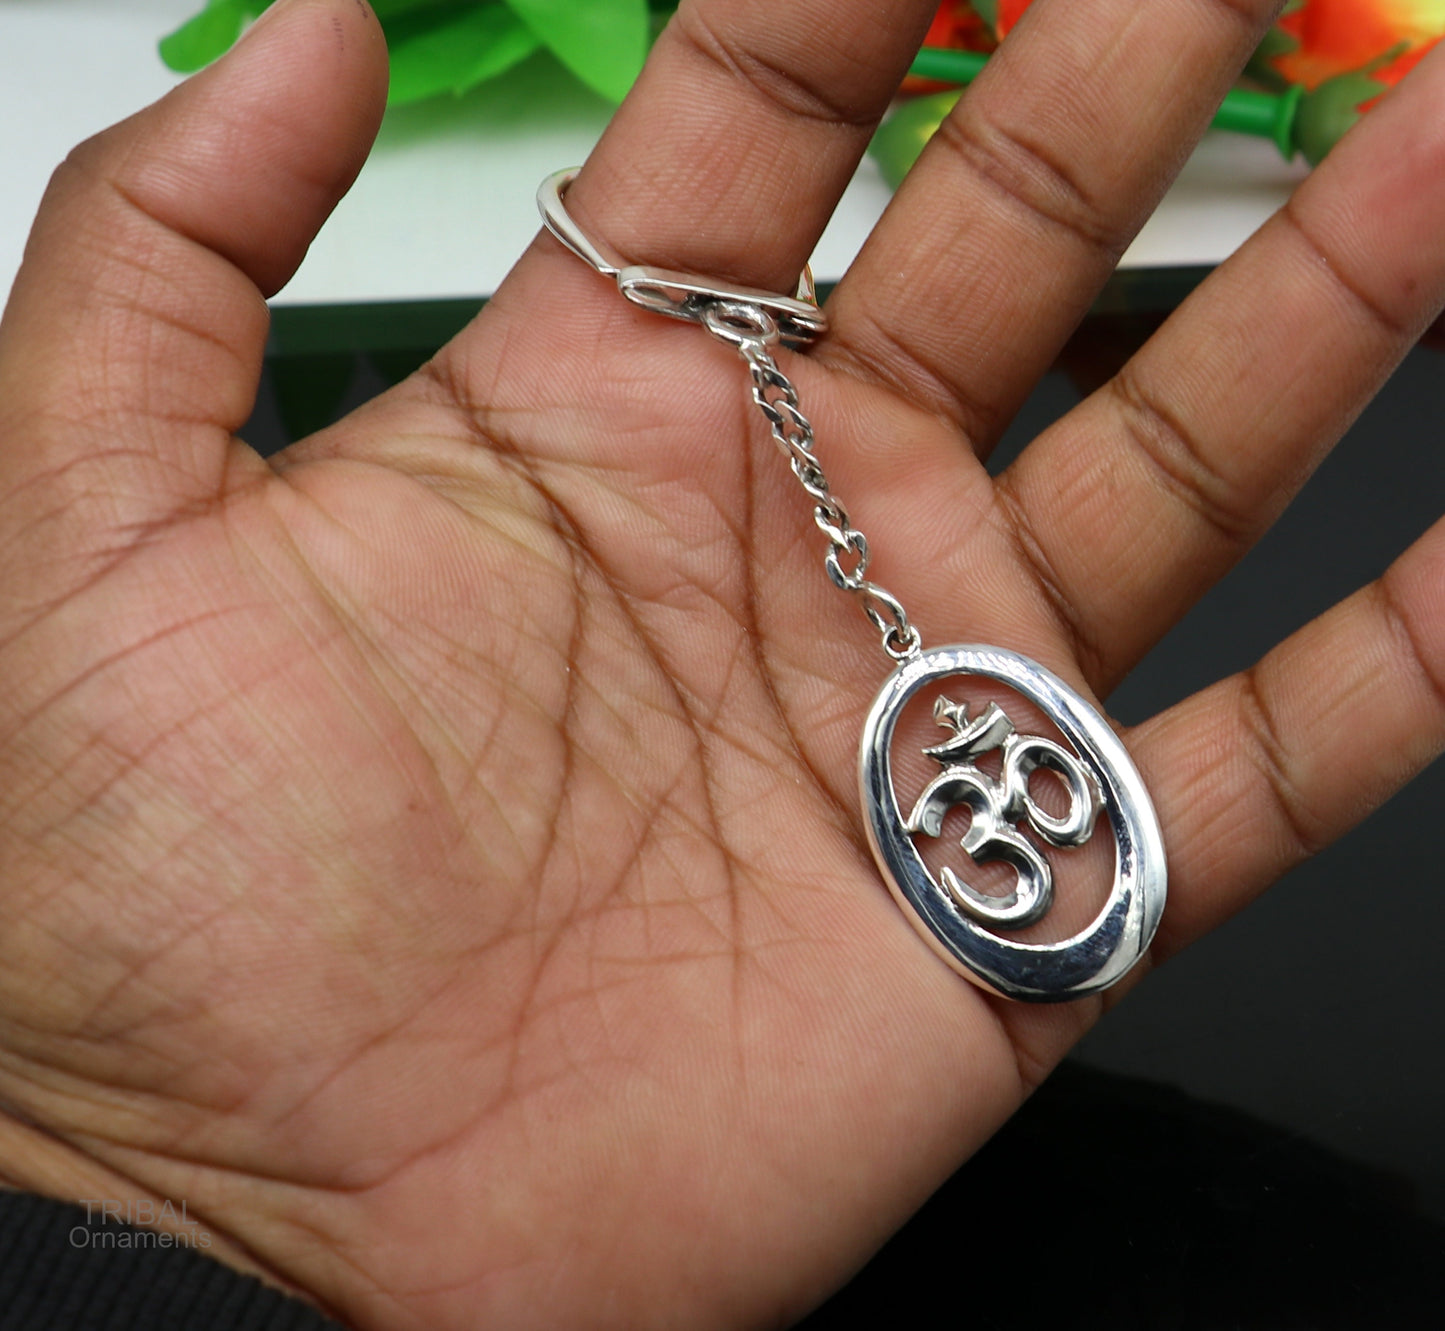 925 Sterling silver handmade unique style OM "aum" mantra solid key chian, stylish royal gifting silver accessories unisex gift kch08 - TRIBAL ORNAMENTS